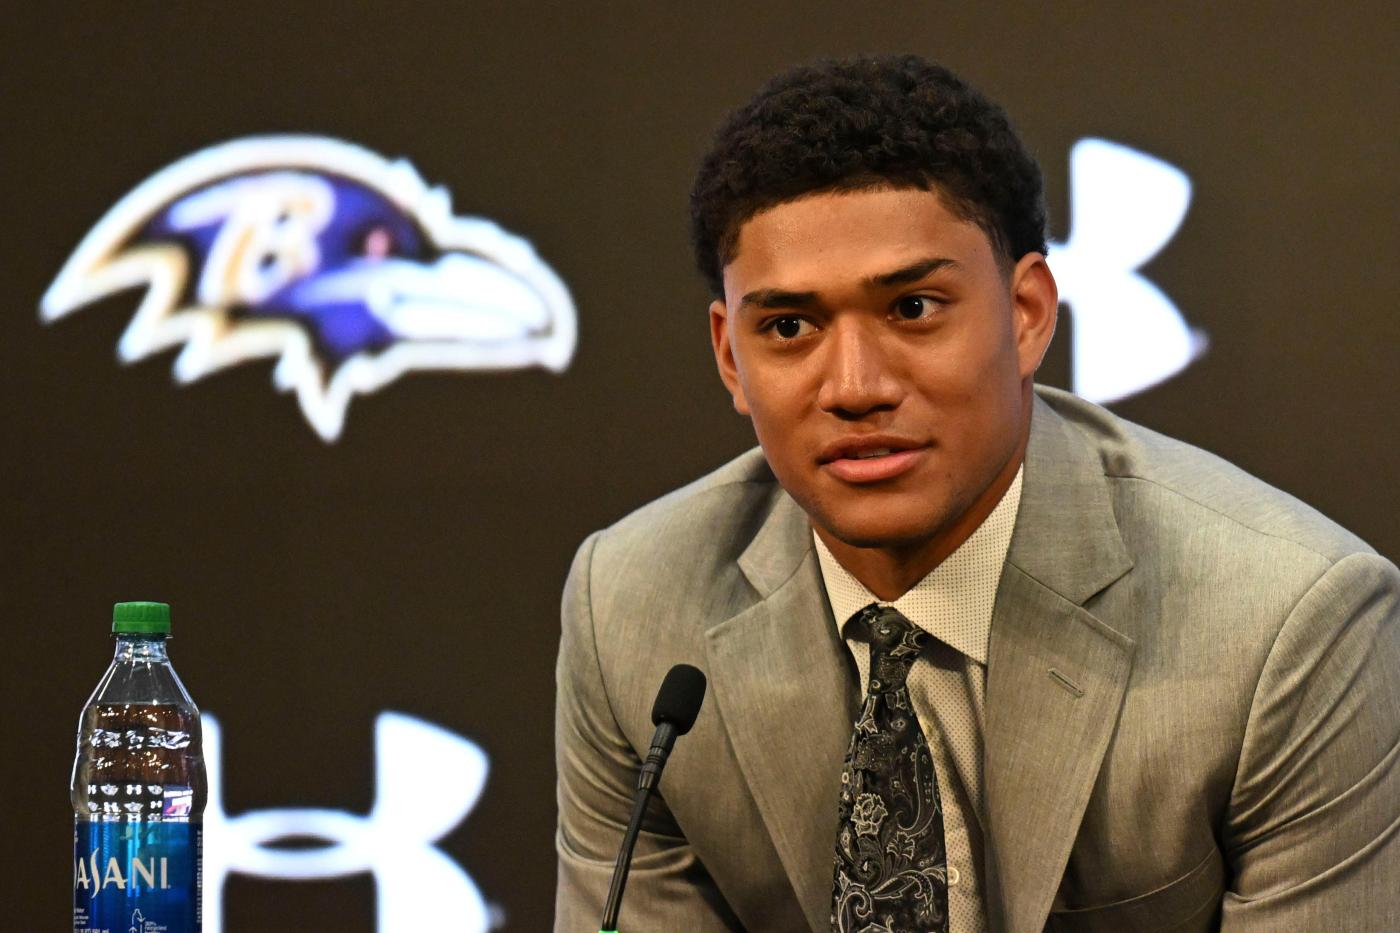 2022 Nfl Draft Recap Everything You Need To Know About The Ravens Picks And Trades Haas